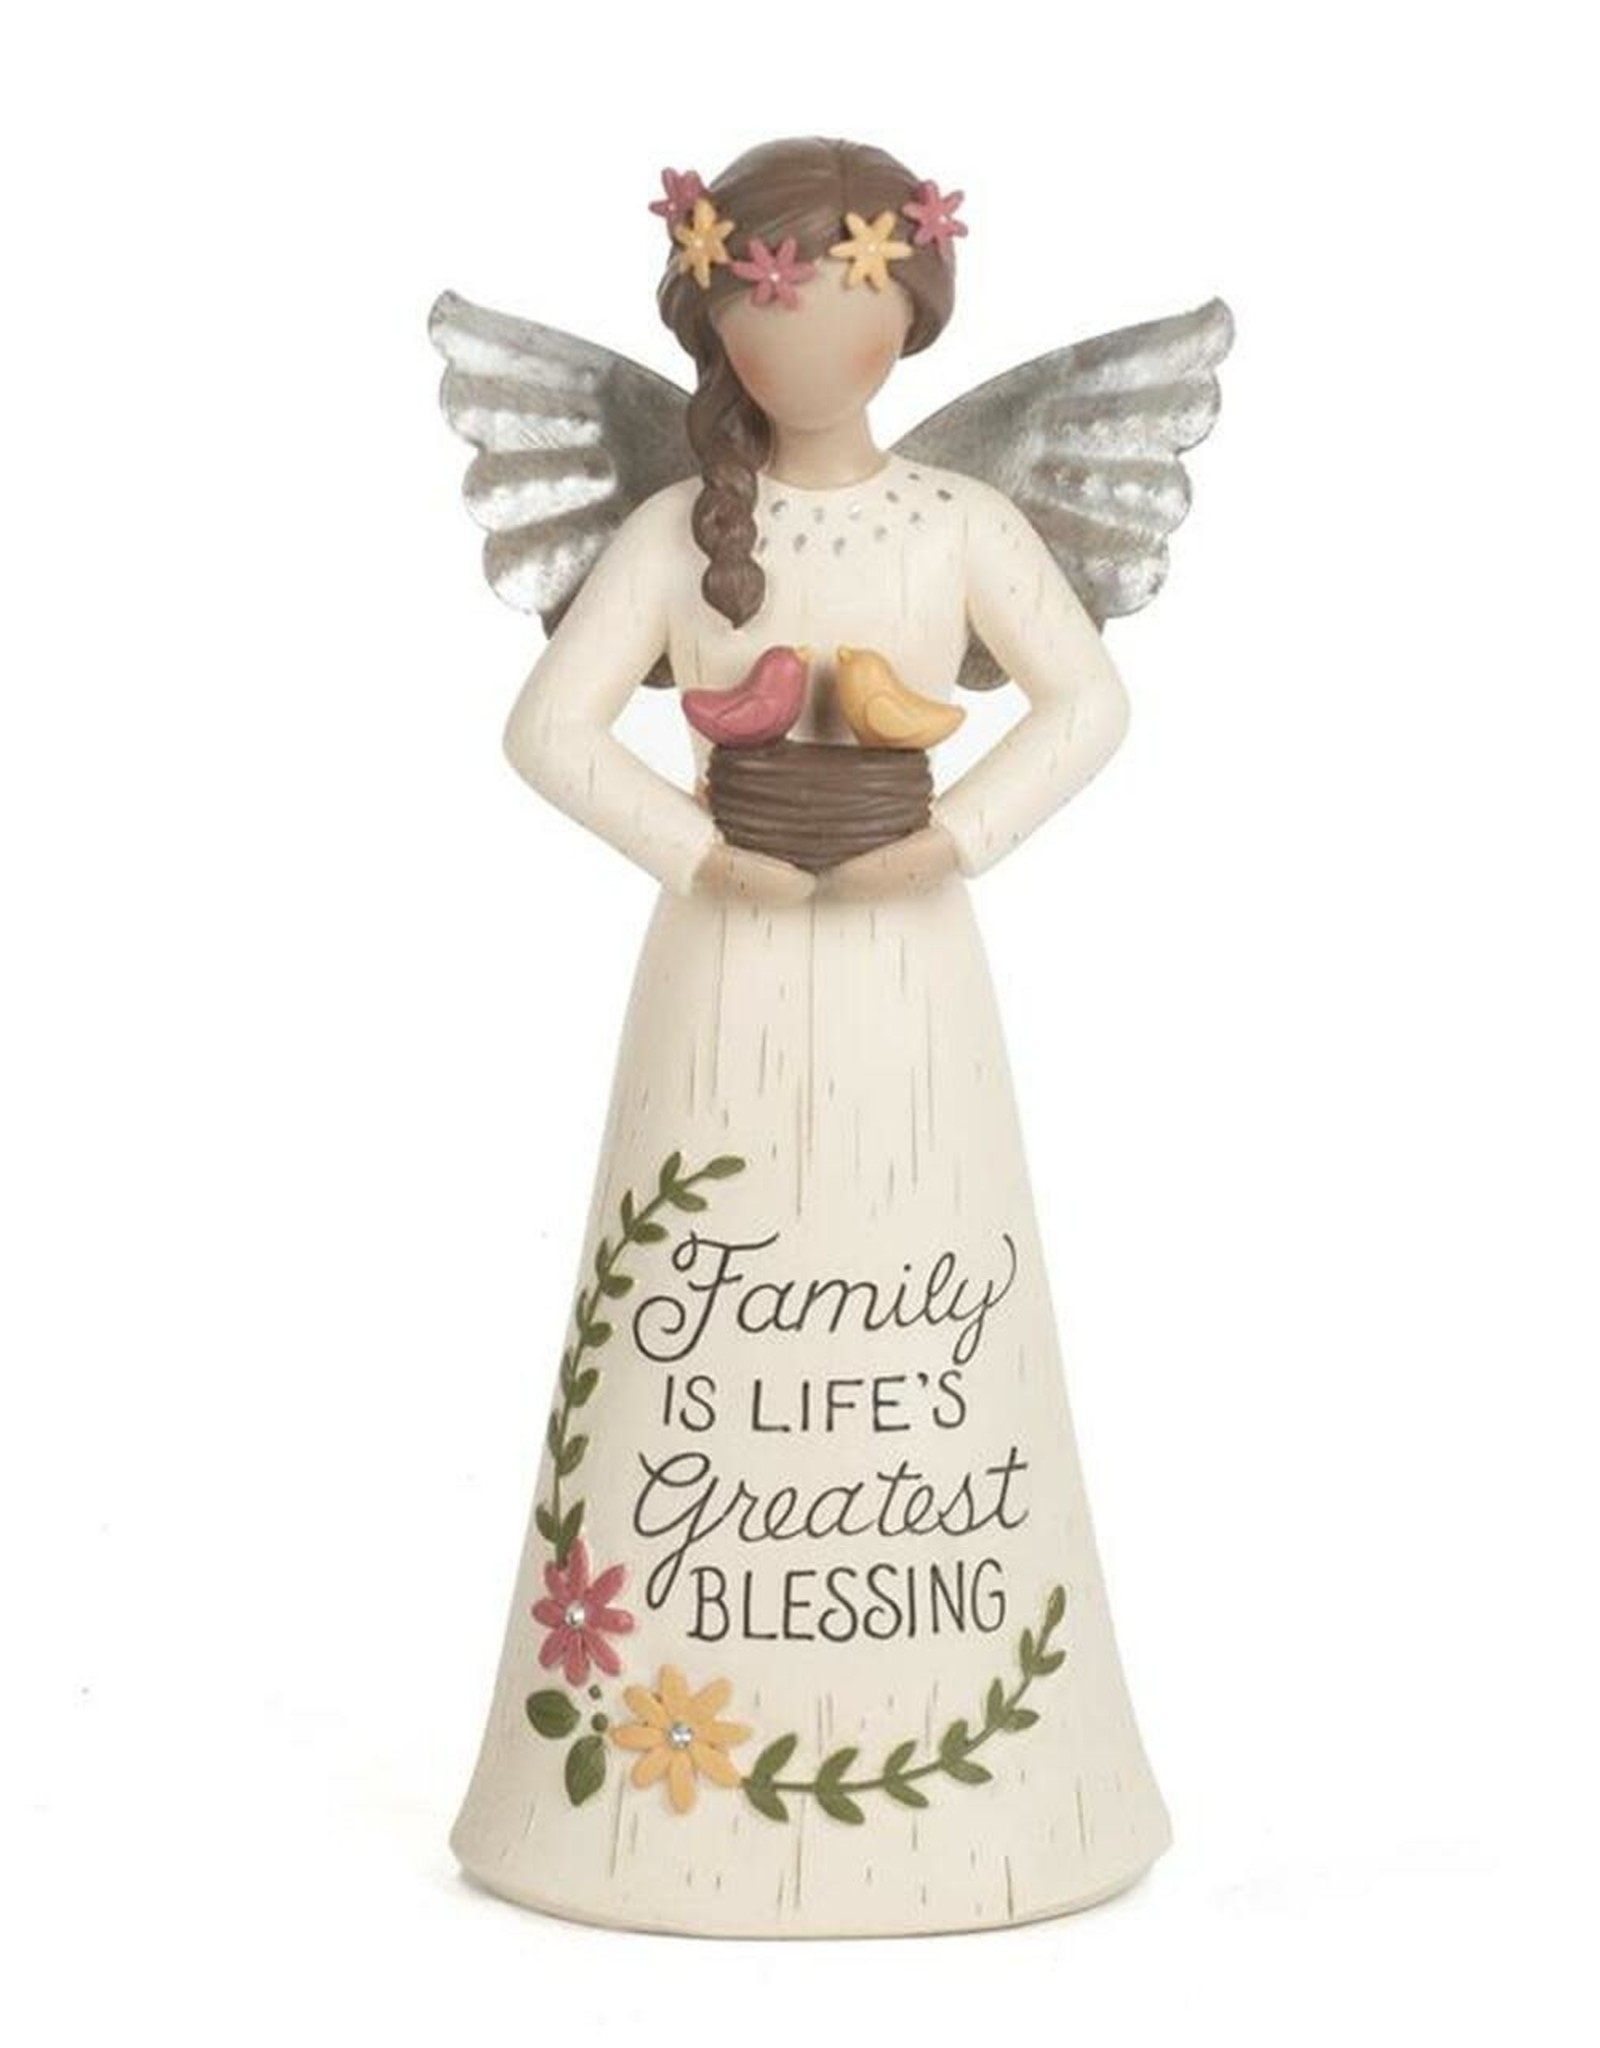 8" Angel Figurine - Family is Life's Greatest Blessing